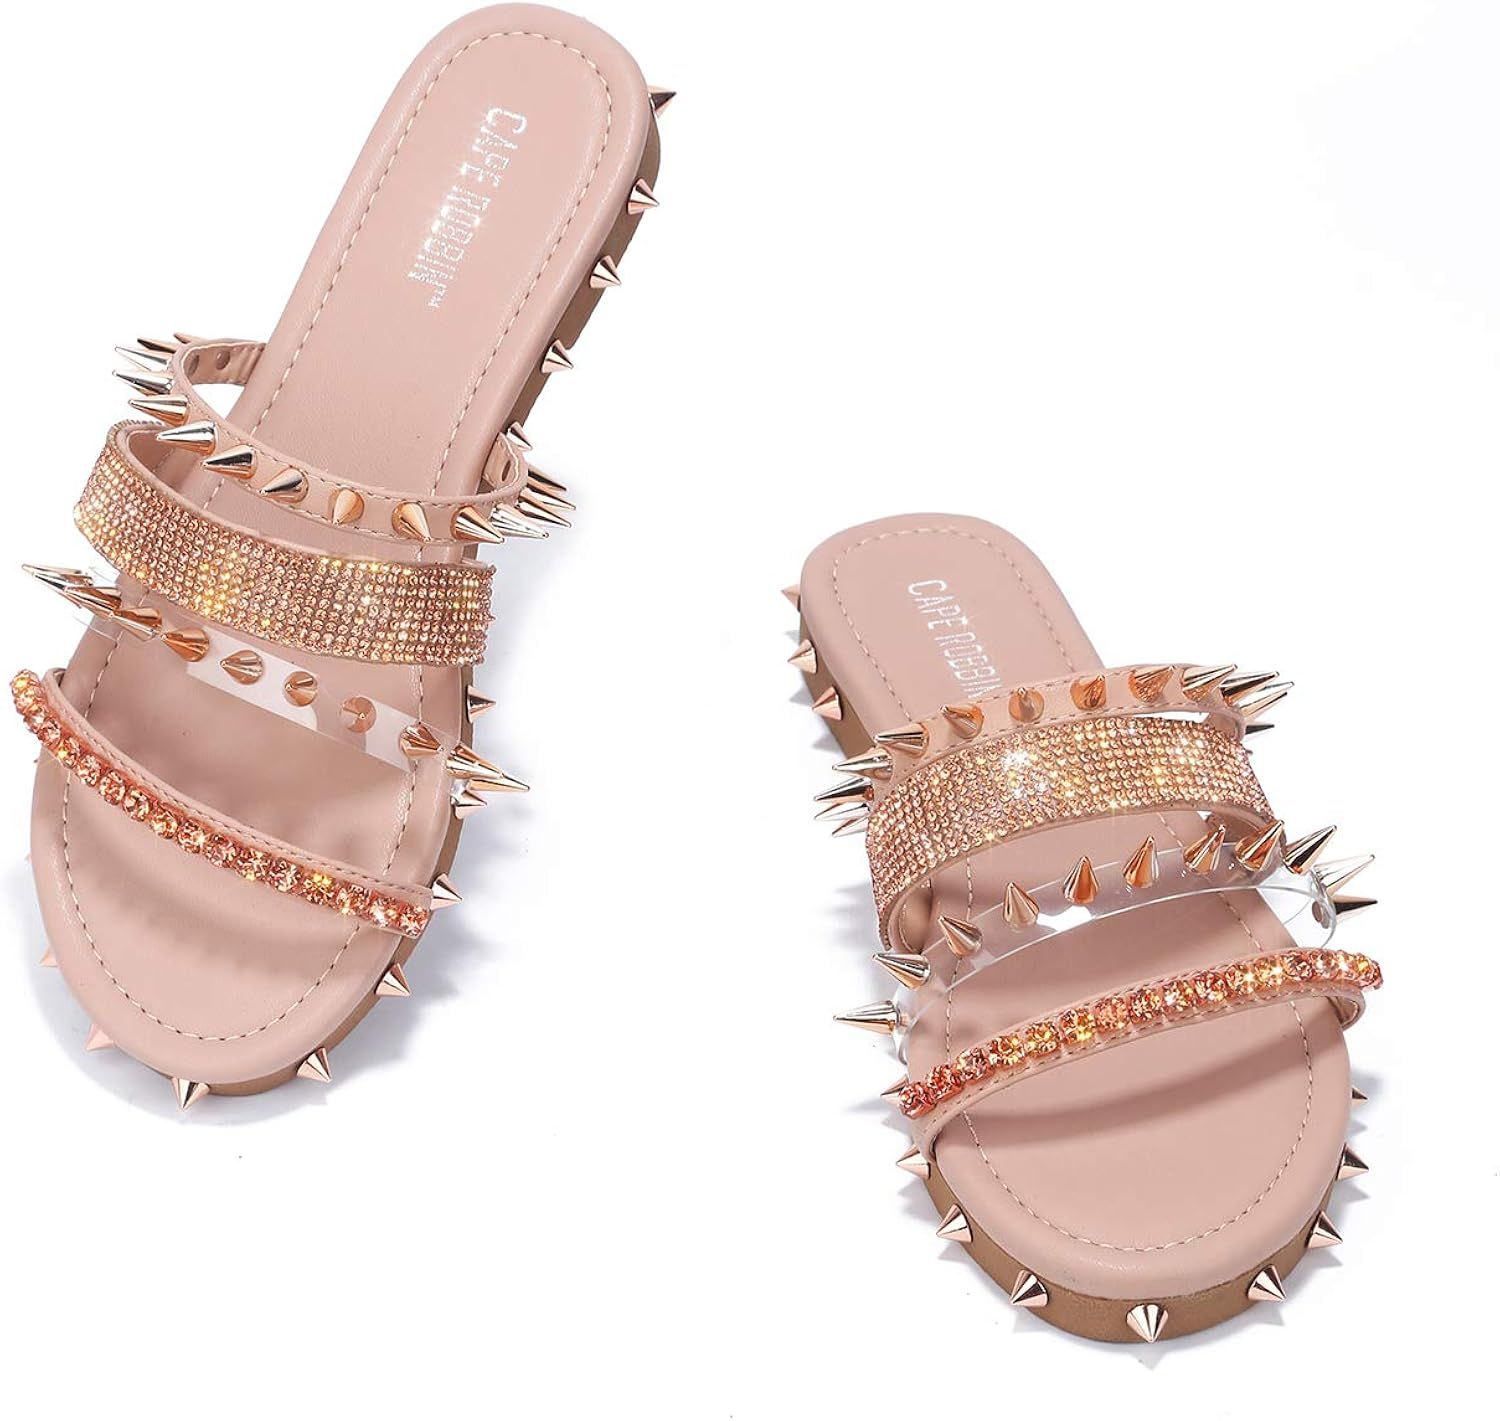 Cape Robbin Xtreme Sandals Slides for Women, Studded Womens Mules Slip On Shoes | Amazon (US)